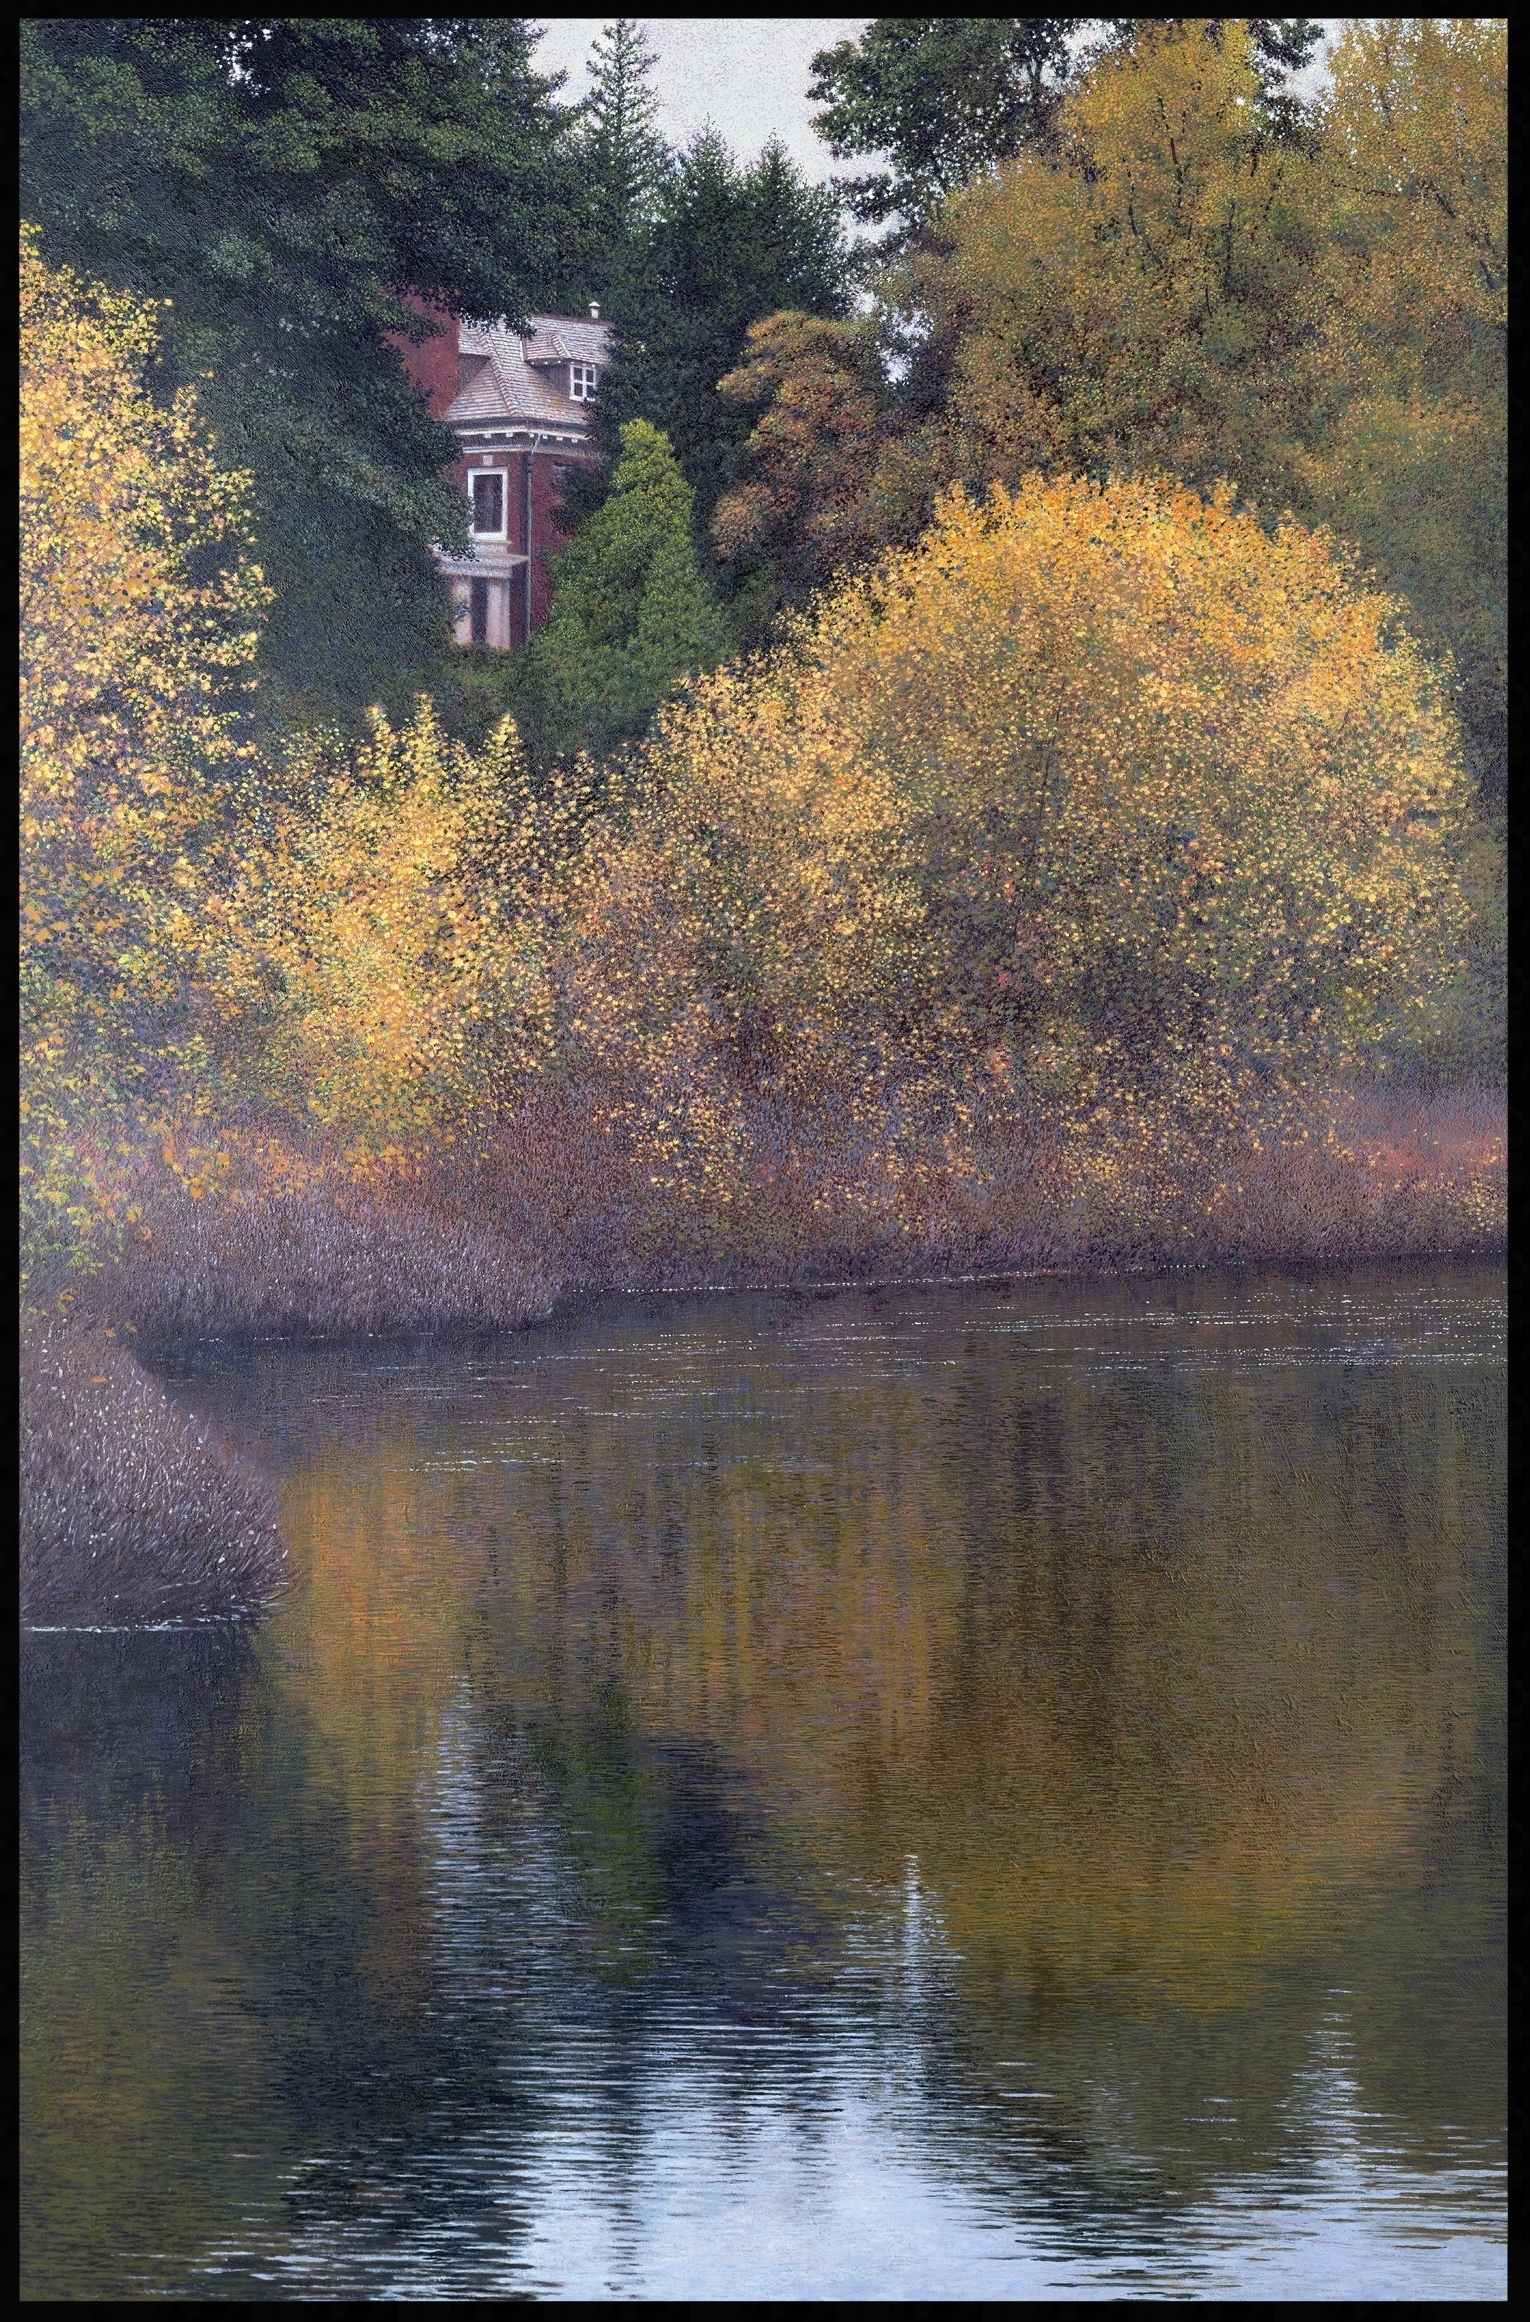  Concord Reflections (36"x24") Oil on Linen 